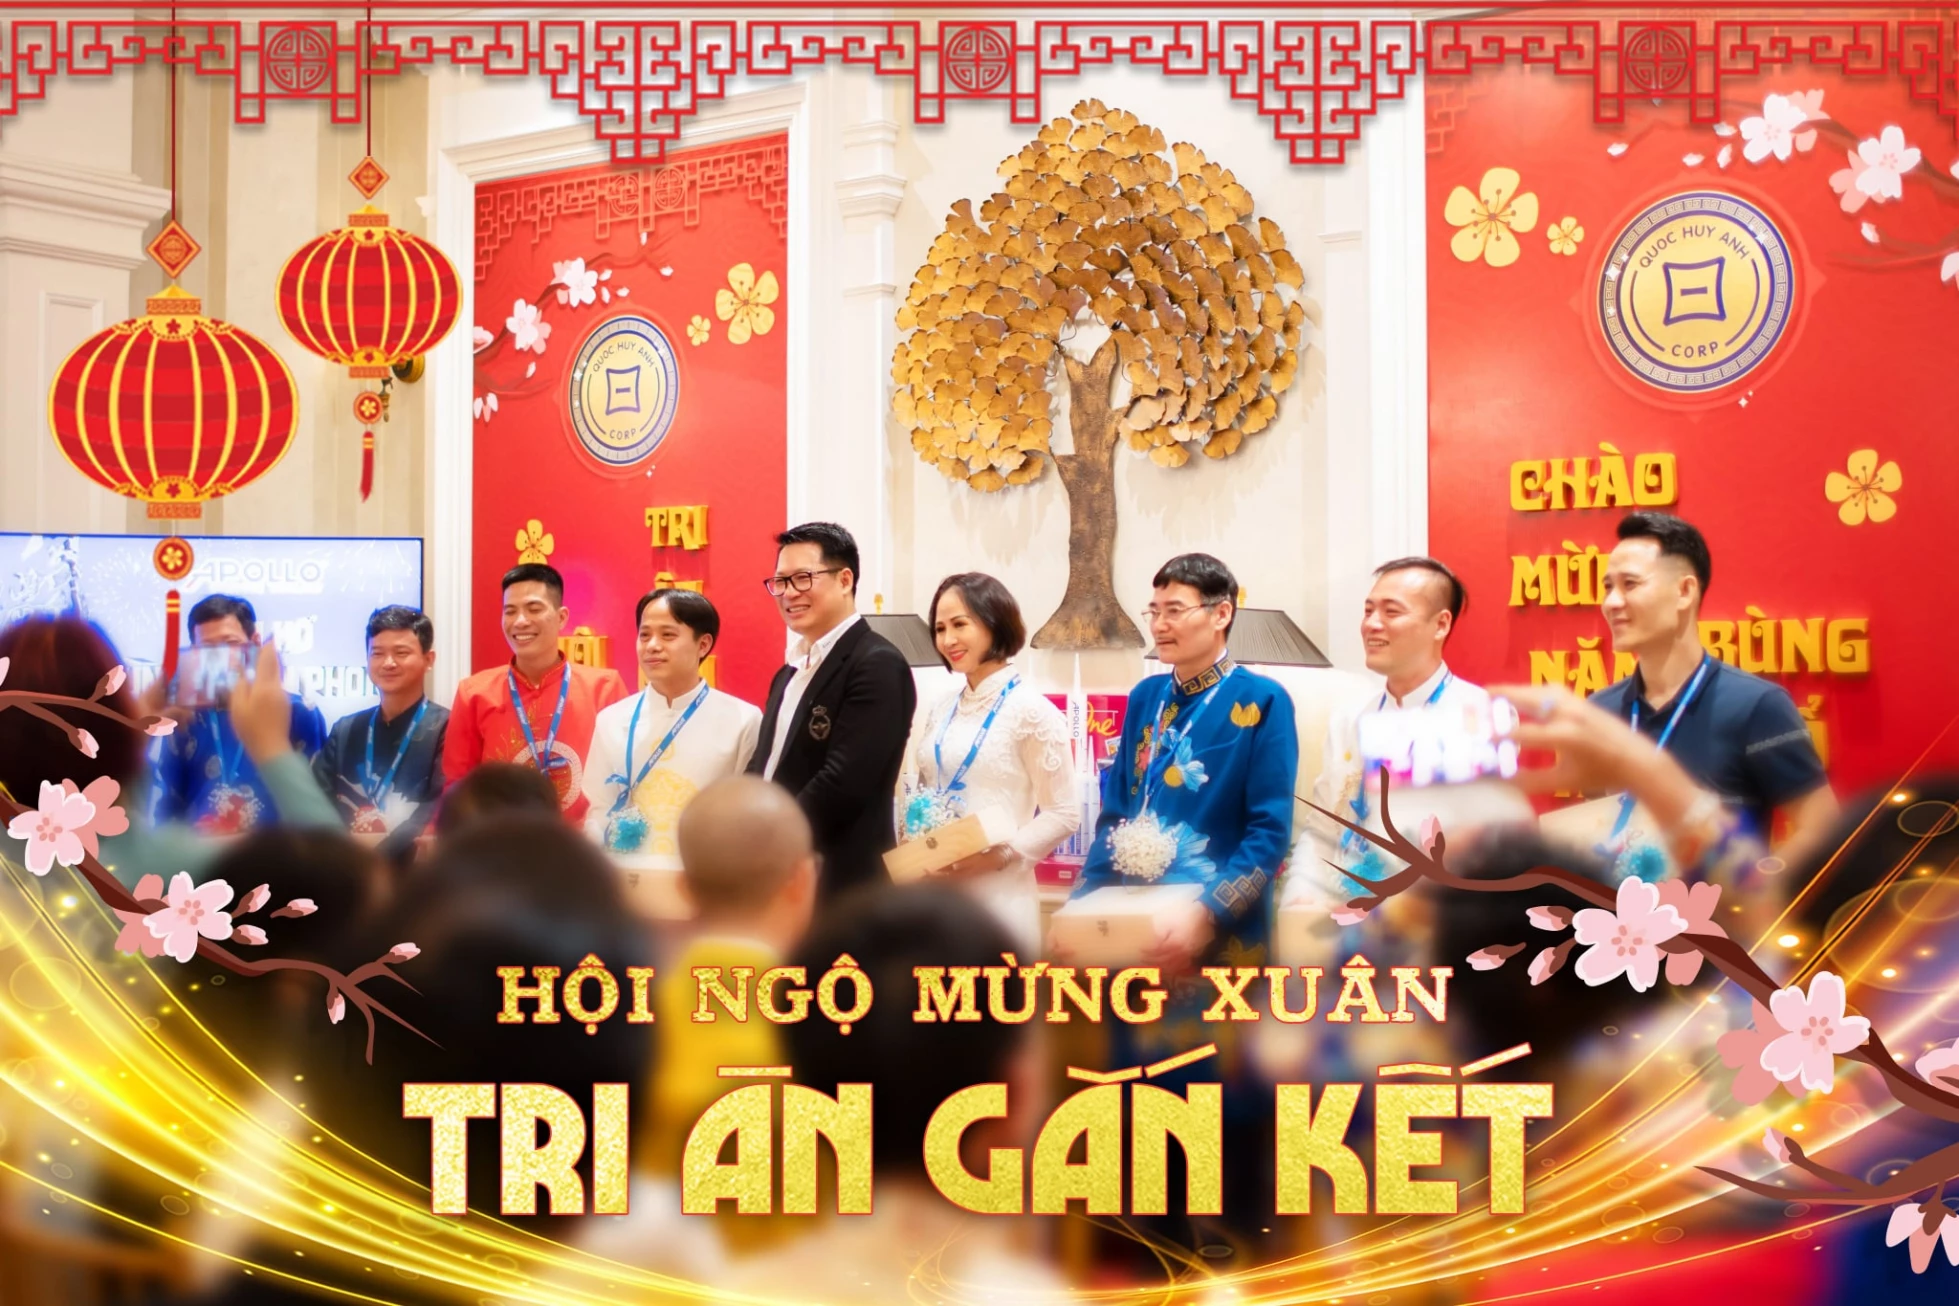 New Year Gathering & Engaging event at Quoc Huy Anh